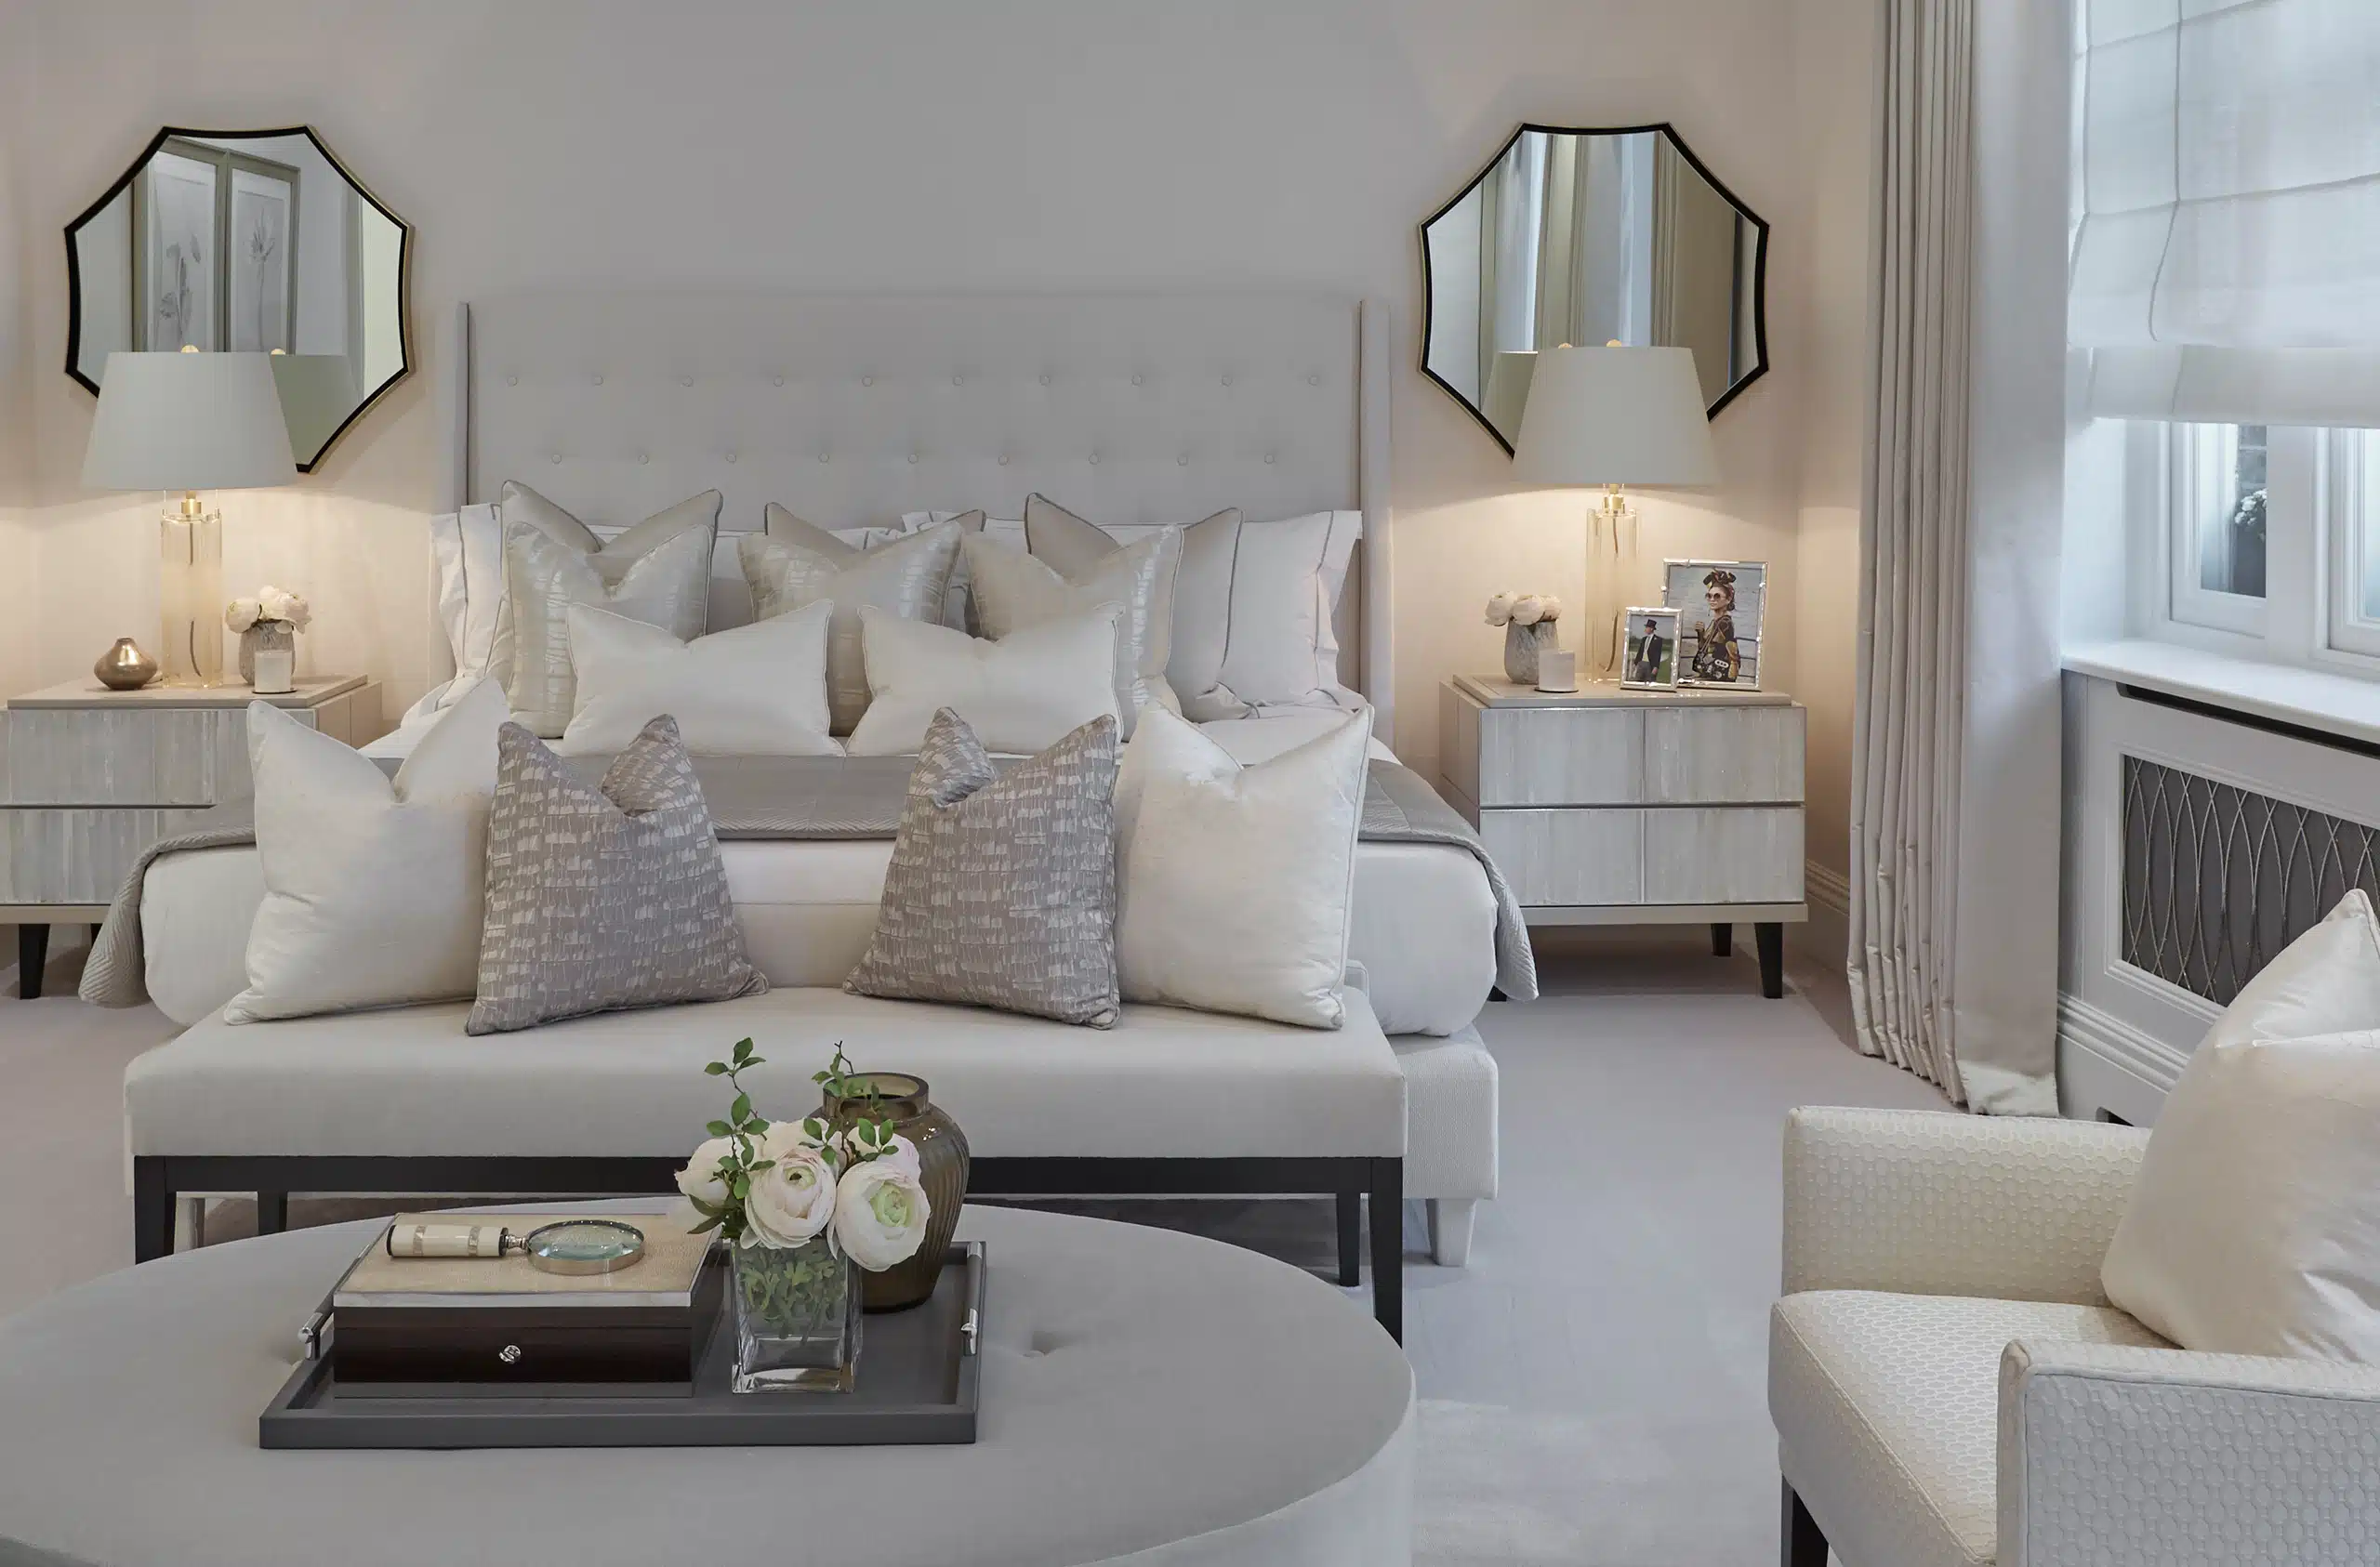 Main bedroom details at a london townhouse interior design project with katharine pooley